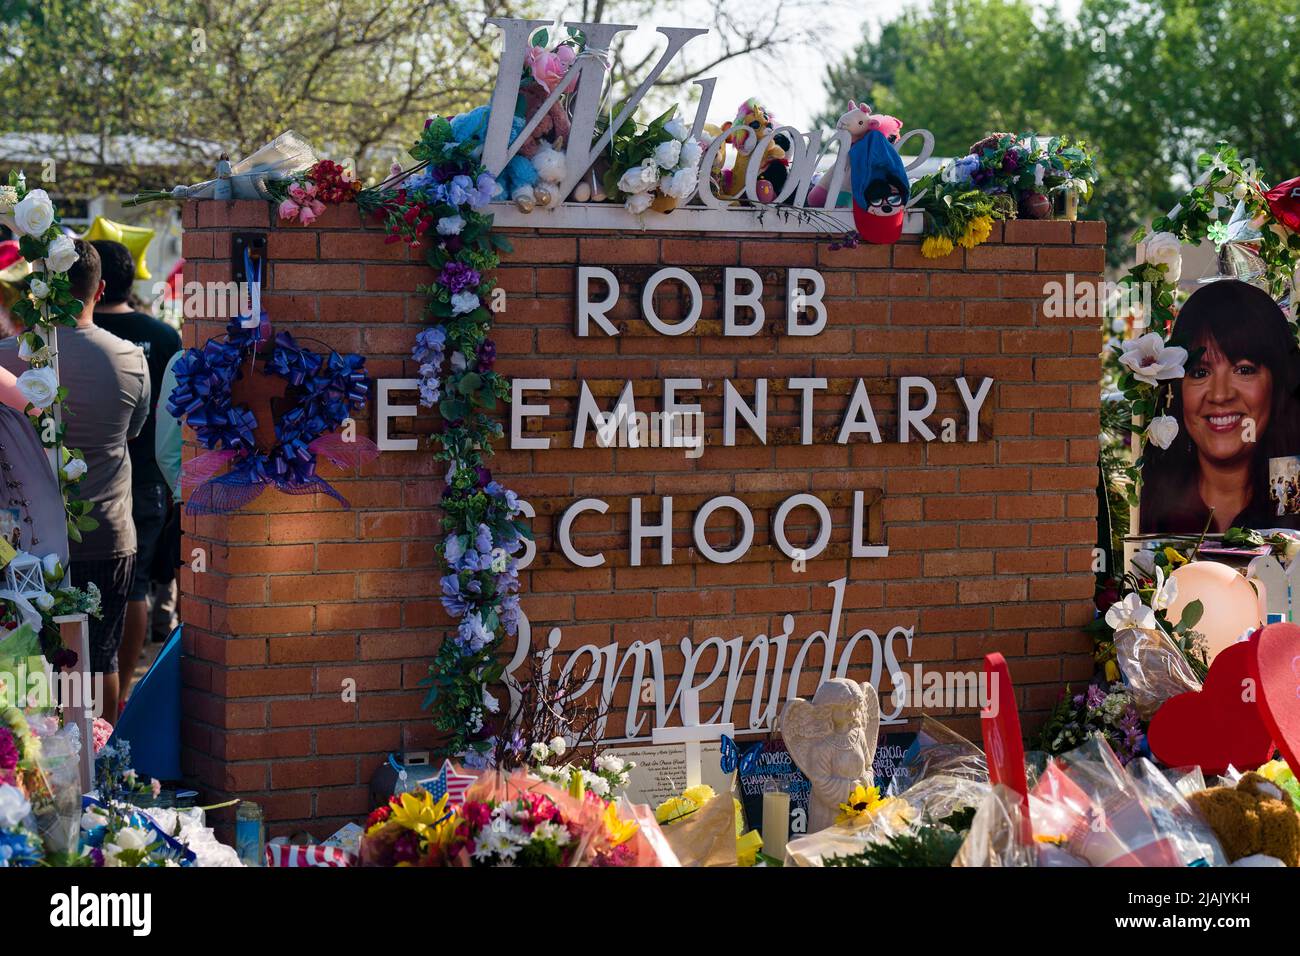 May 30, 2022: The welcome sign in front of Robb Elementary School in Uvalde, Texas is decorated in memory of the 19 children and two teachers killed there in a school shooting massacre. (Credit Image: © Jintak Han/ZUMA Press Wire) Stock Photo